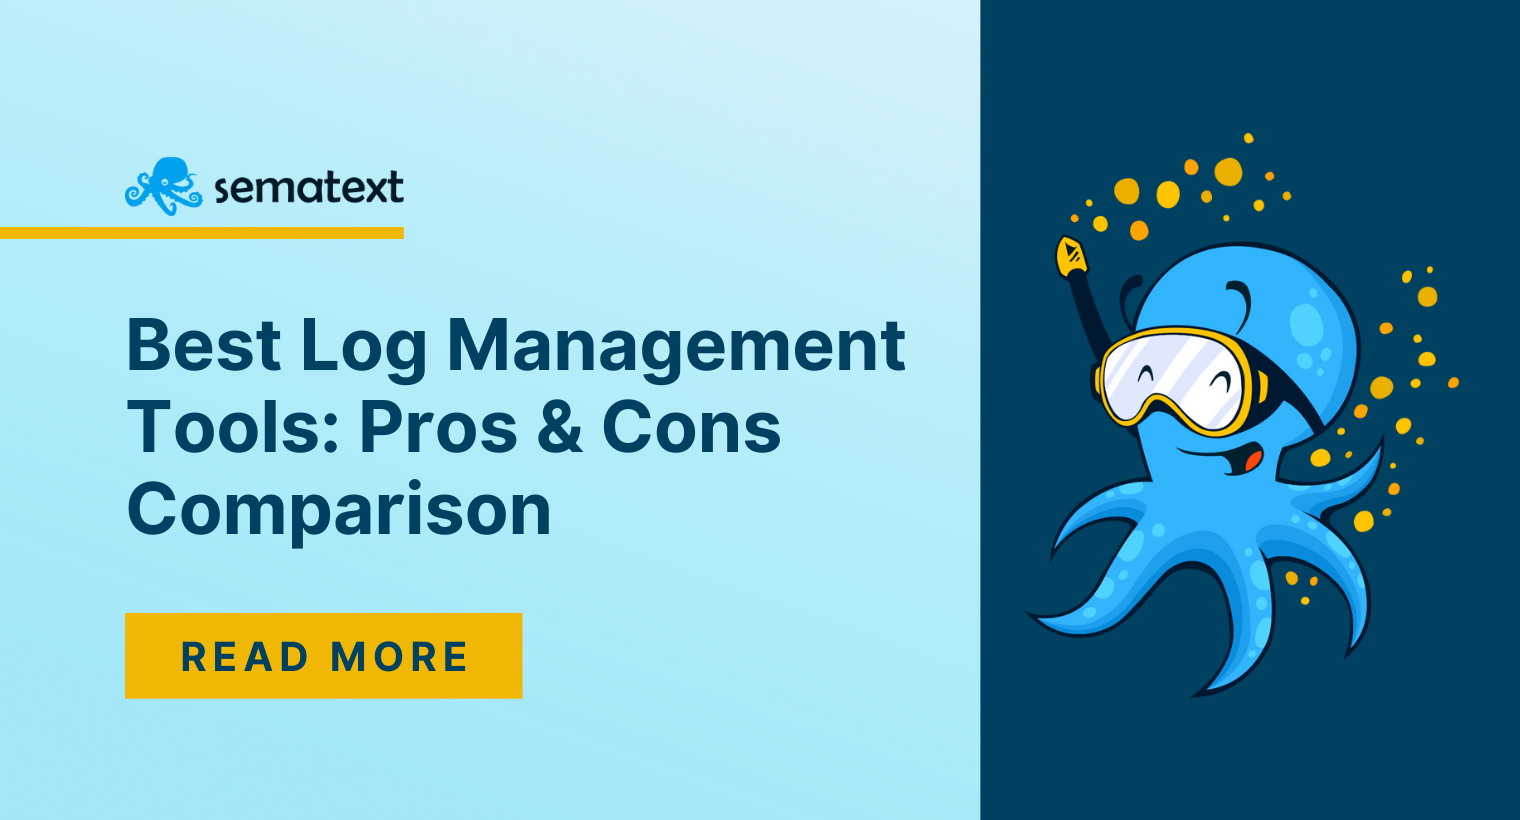 20+ Best Log Management Tools for Monitoring, Analytics & More: Pros & Cons Comparison [2023]